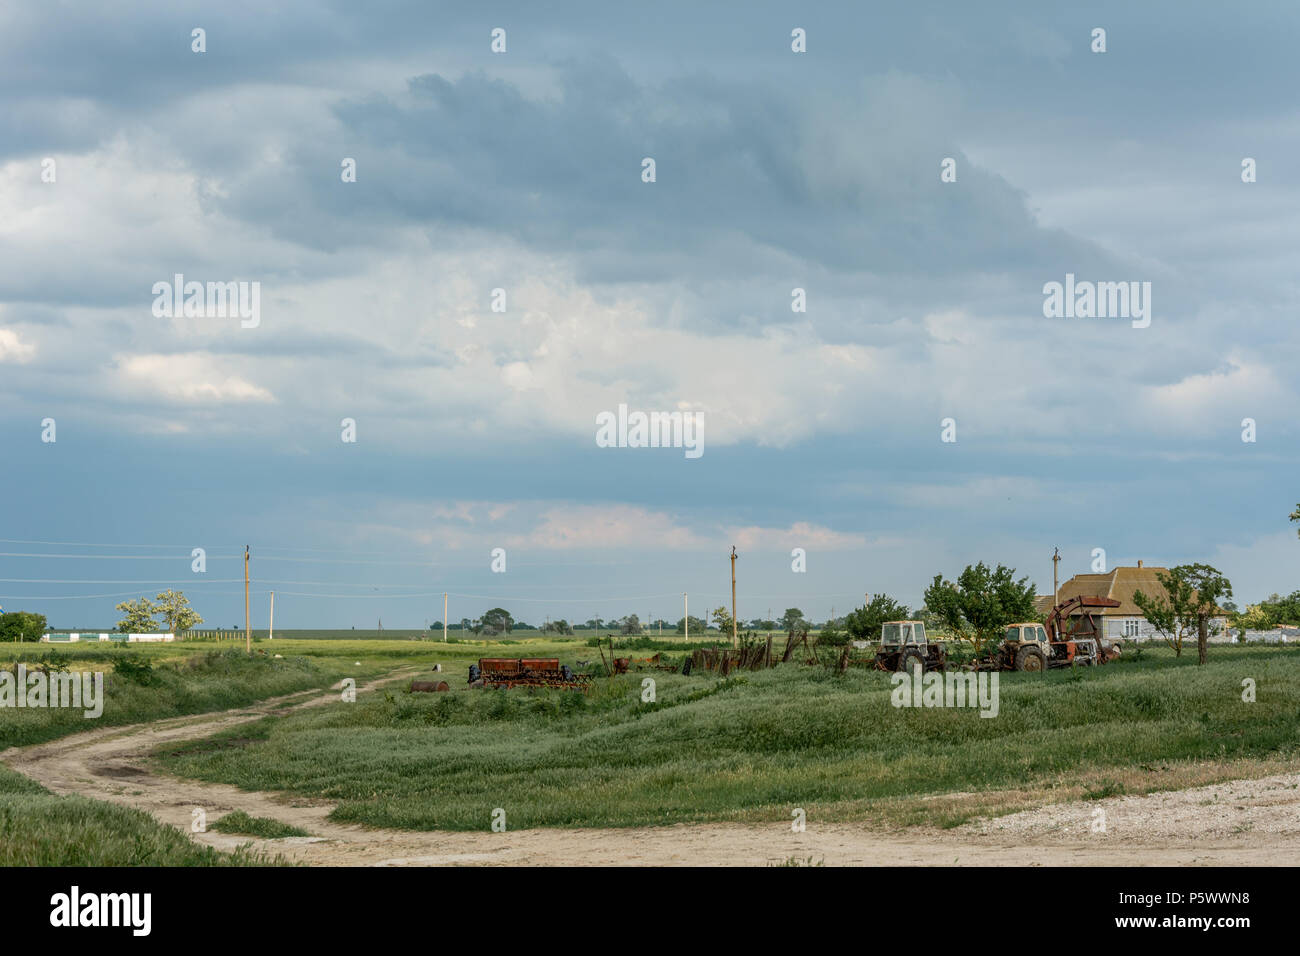 Agricultural equipment on a background of gloomy sky. Gloomy thunderous rural landscape. Stock Photo